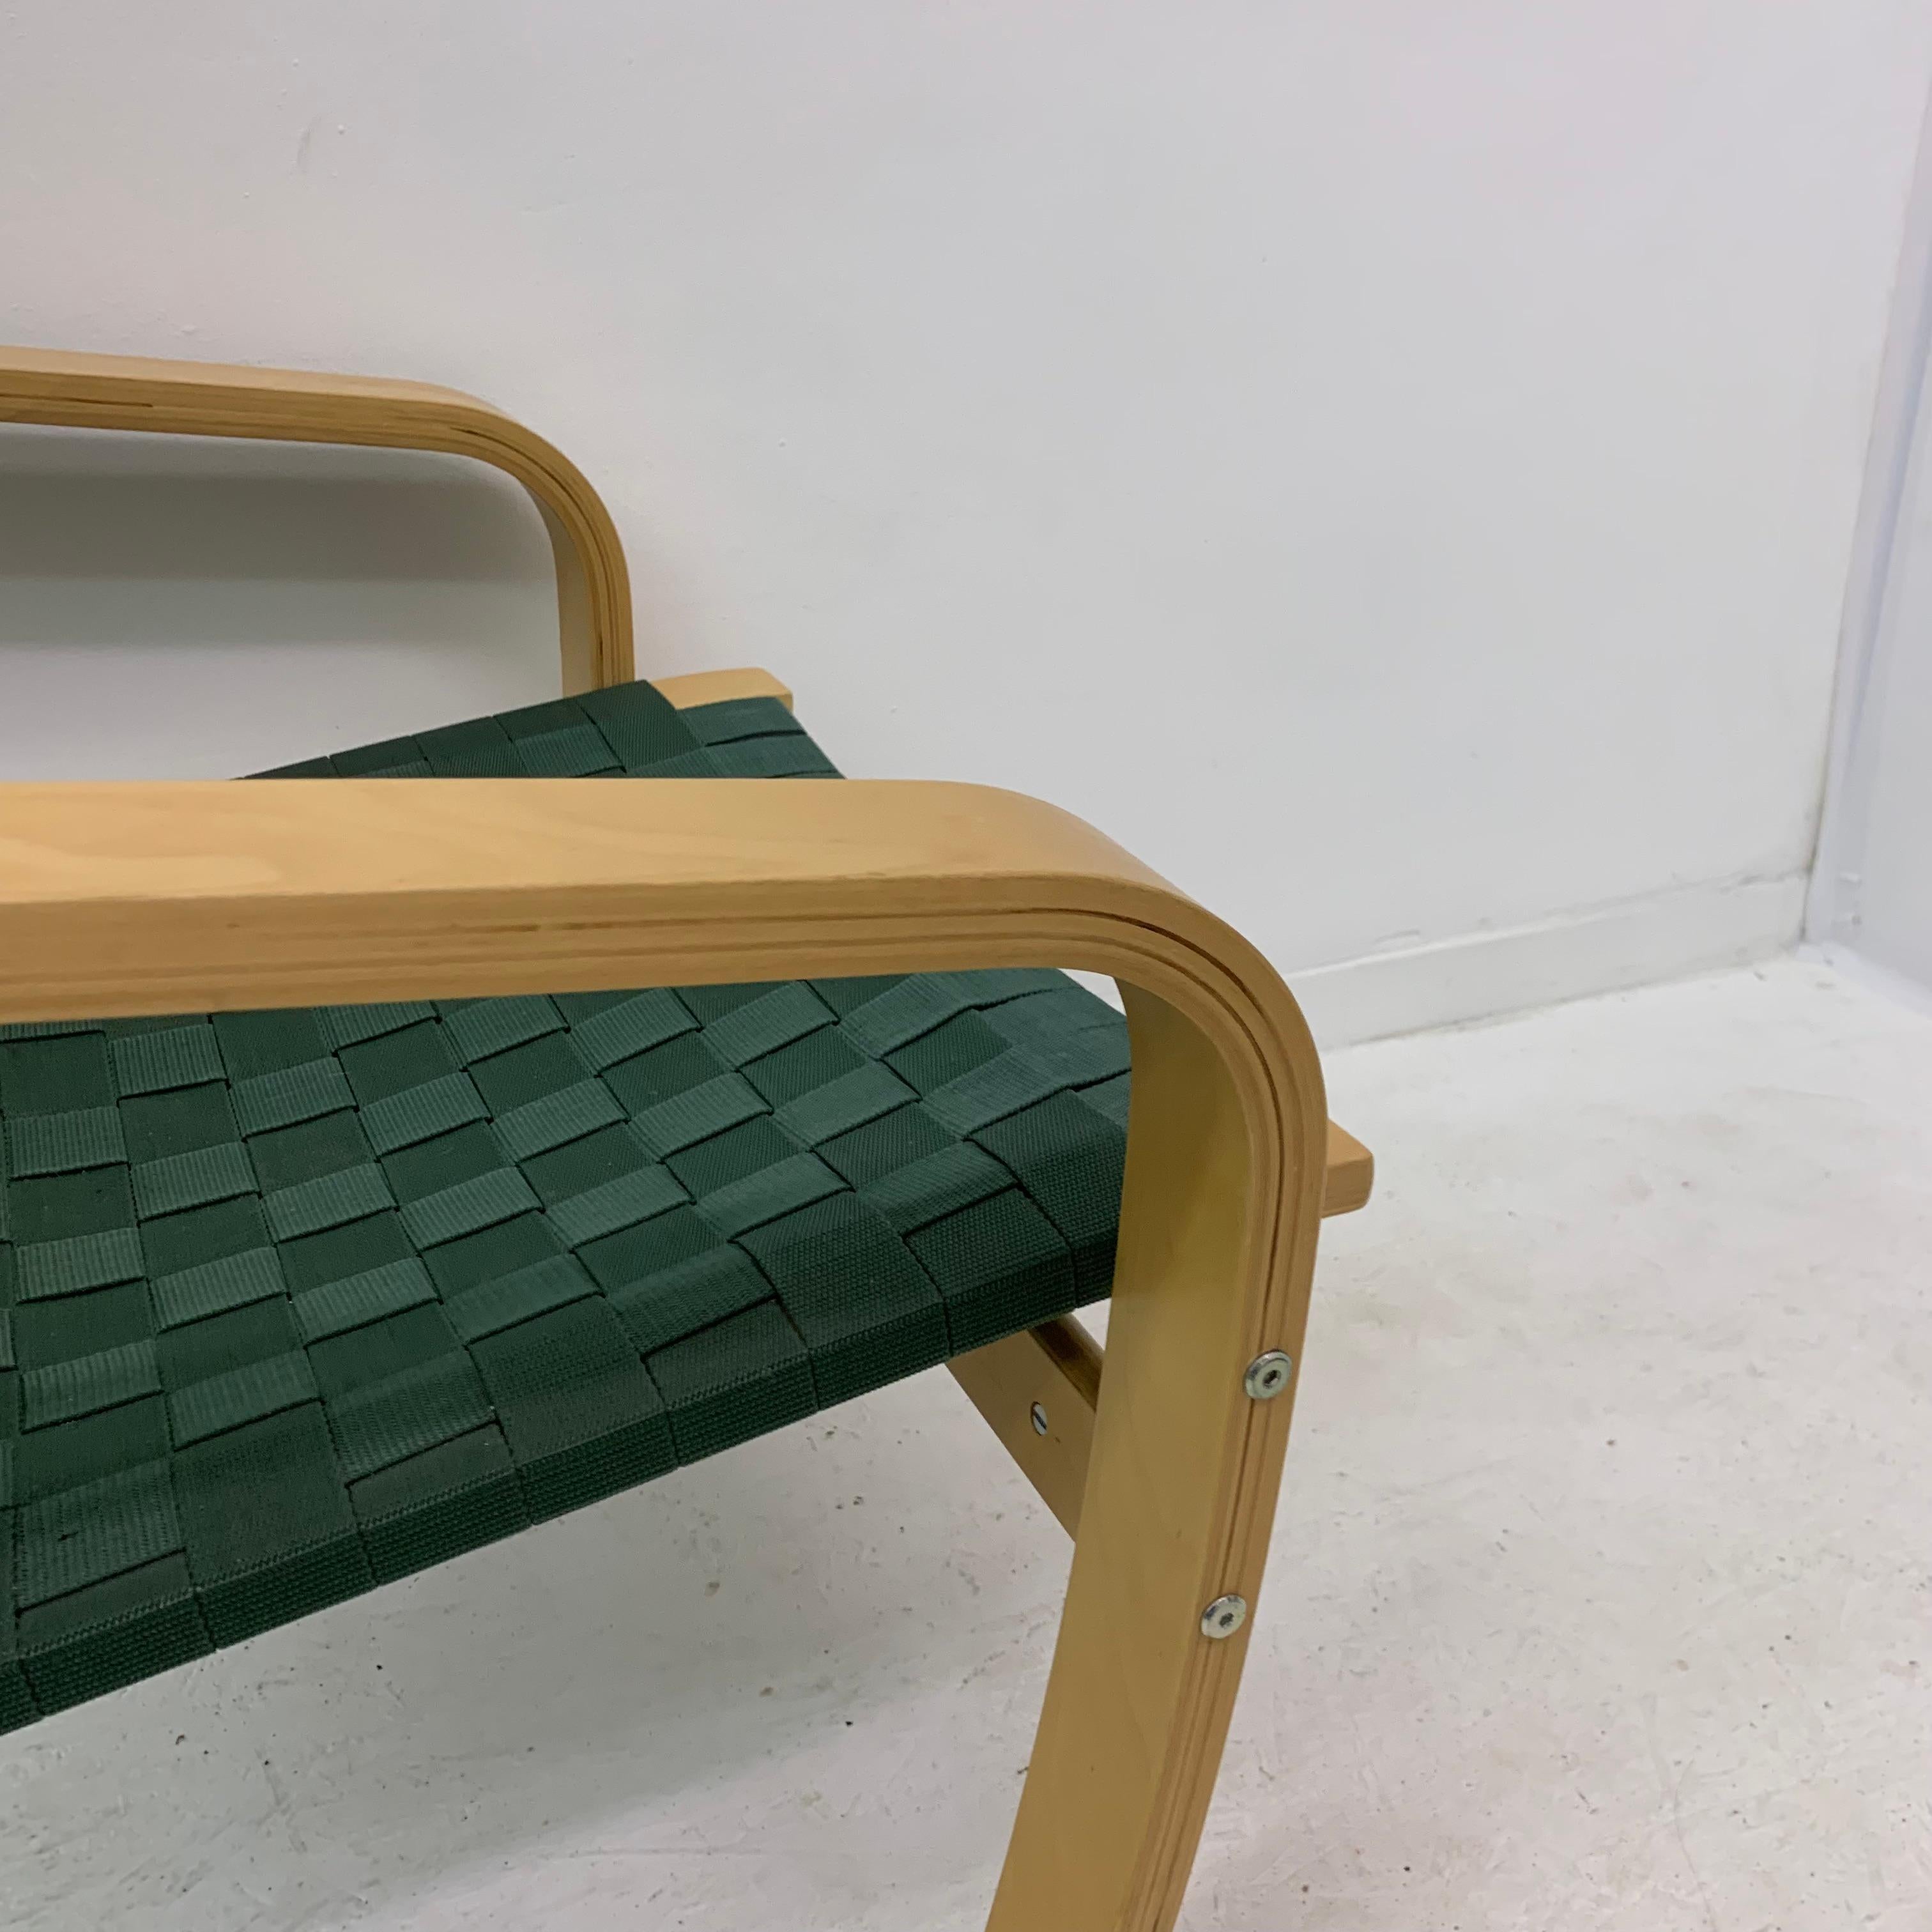 Limited Edition Aalto Tribute Points Chair by Noboru Nakamura for Ikea, 1999 For Sale 7